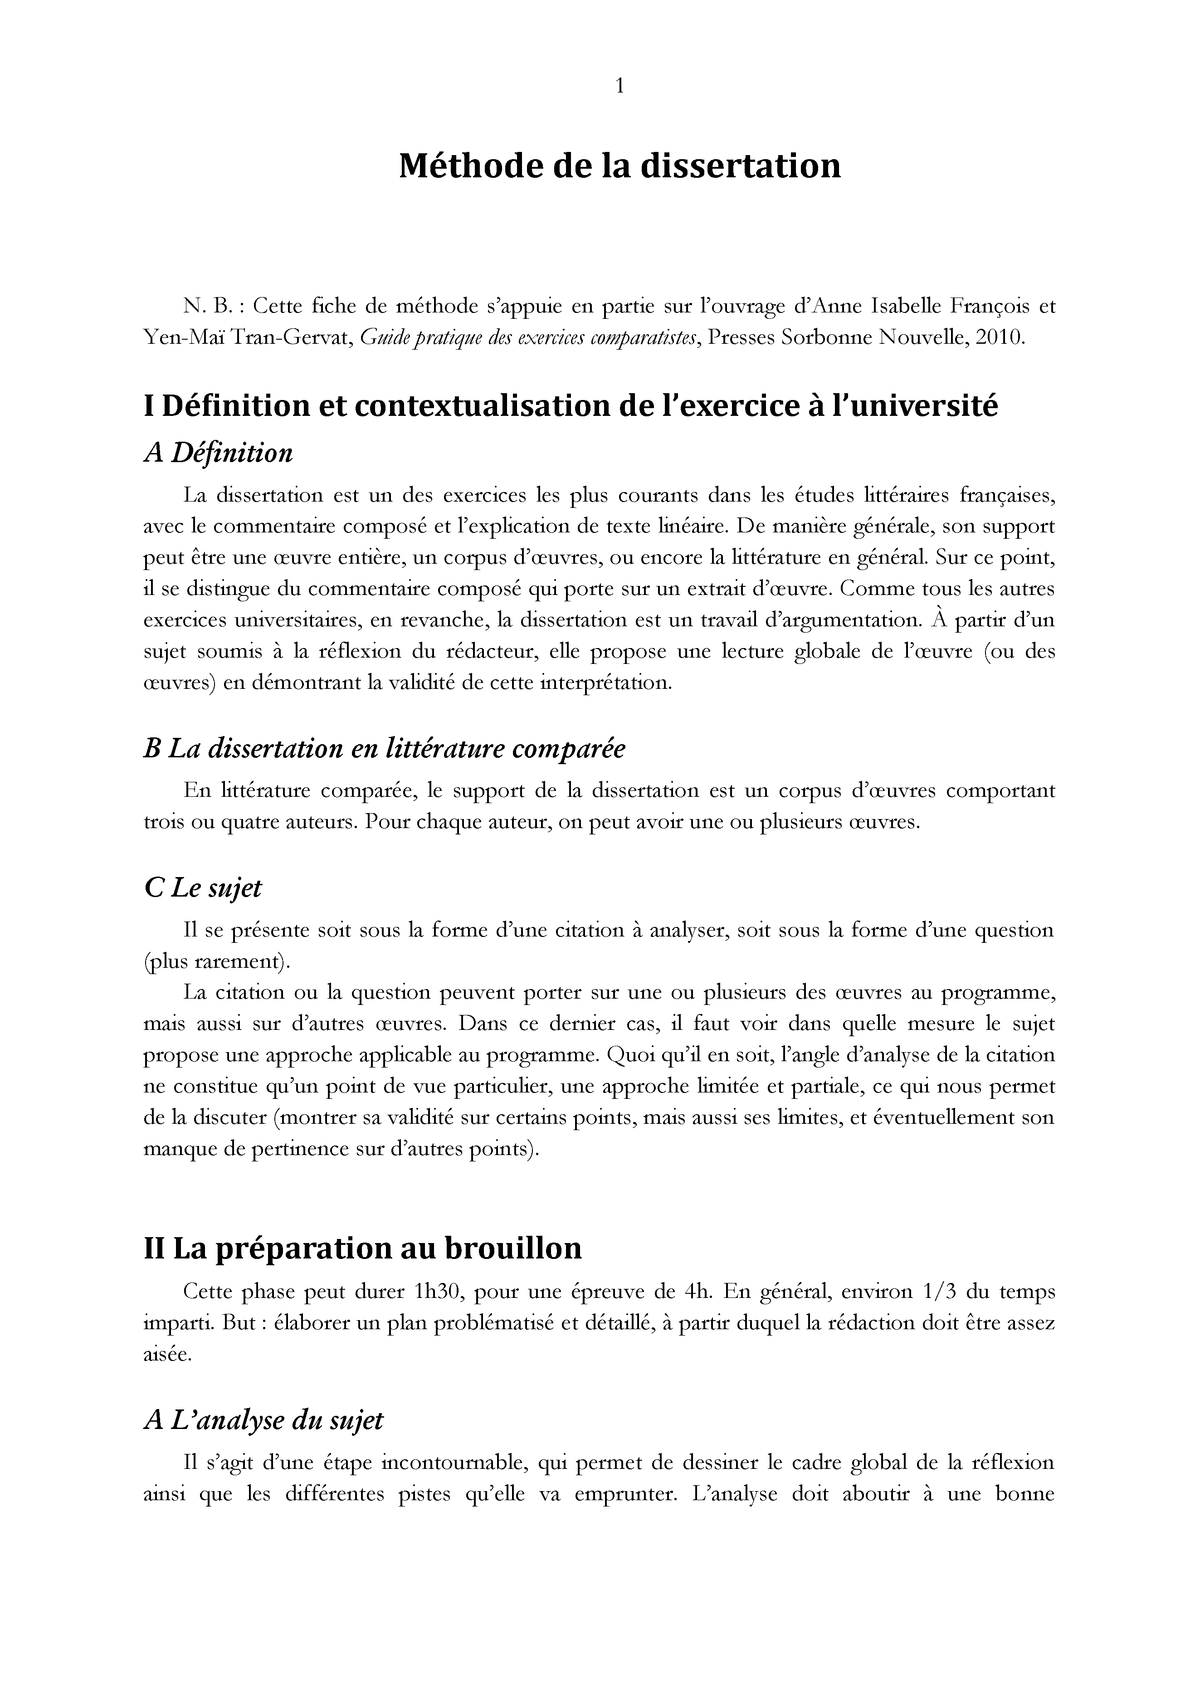 Geology phd thesis